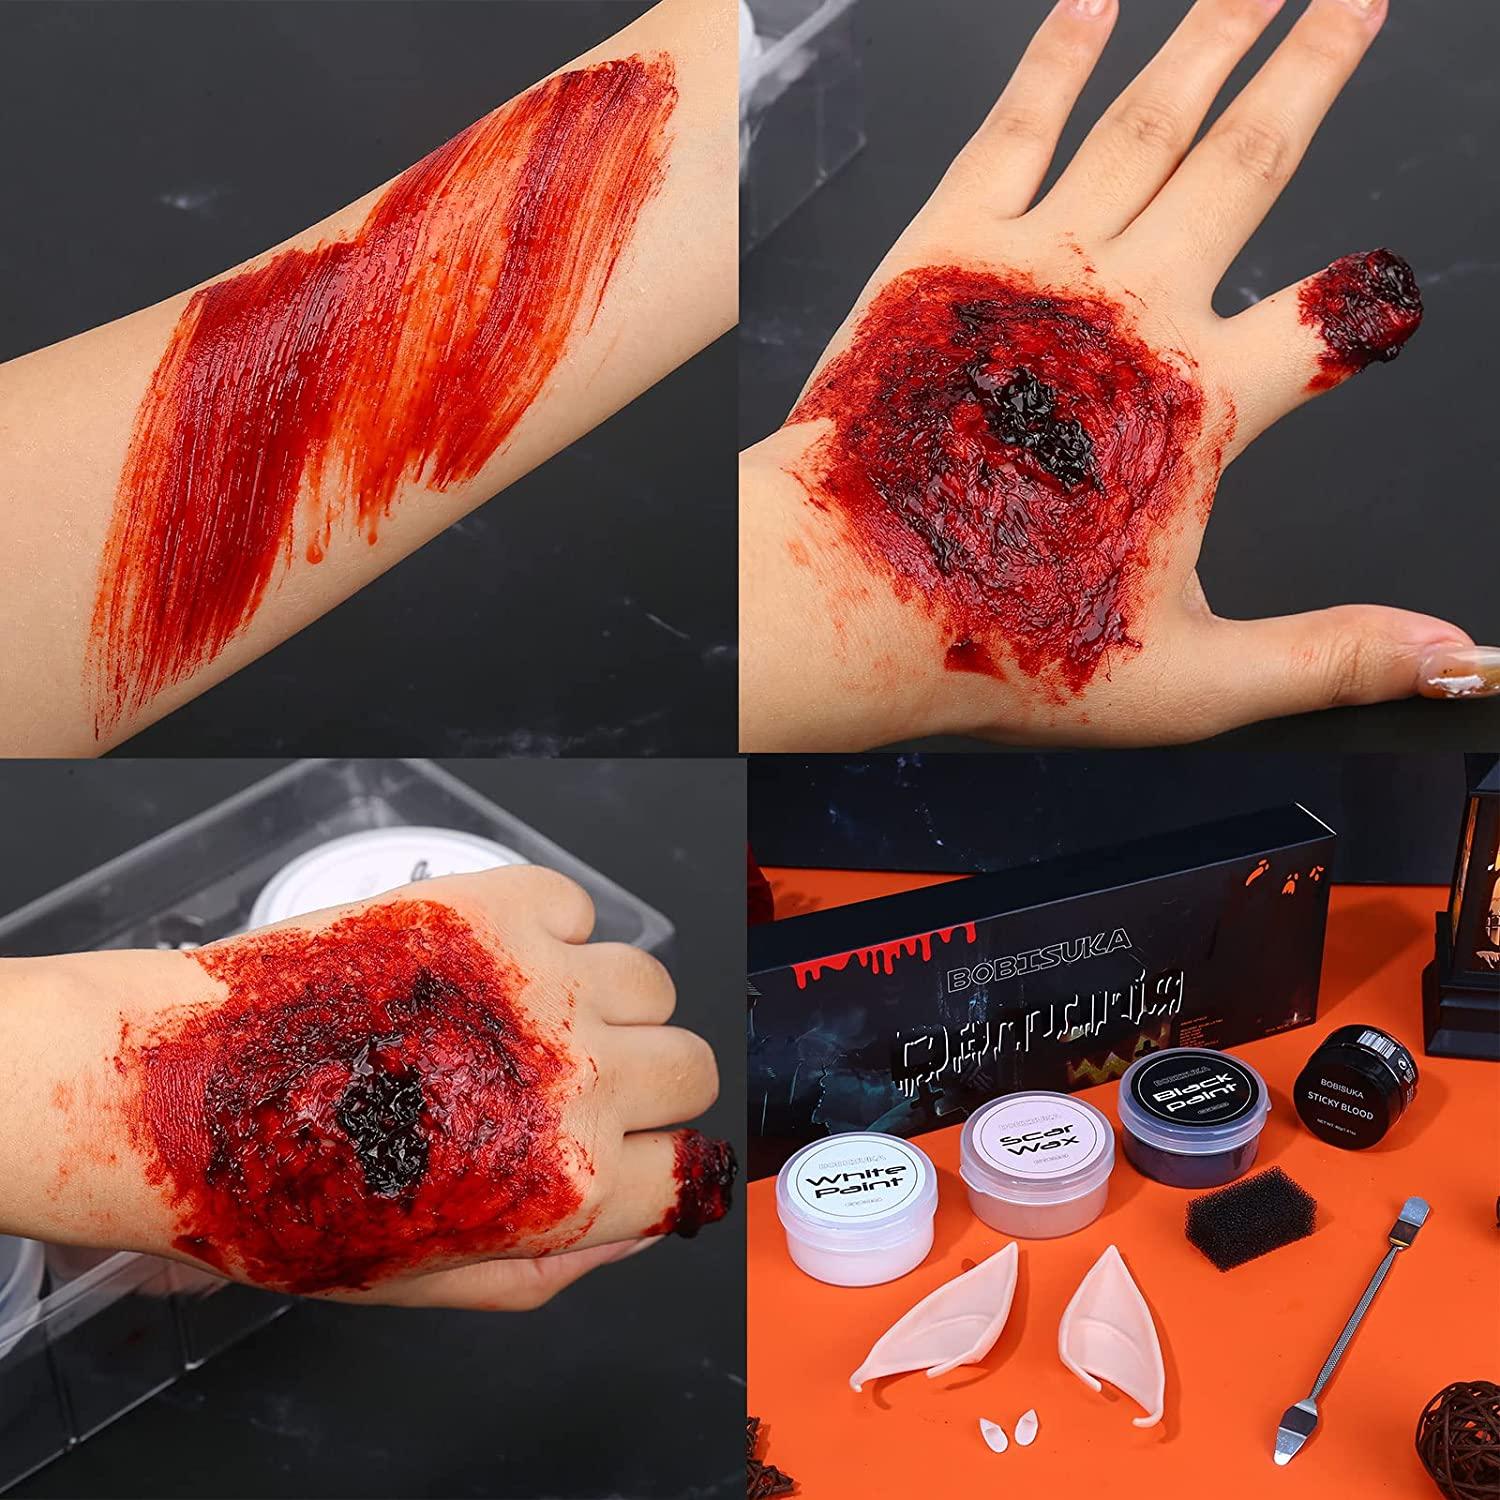 immetee Scar Wax SFX Makeup Kit, Face & Body Paint, Christmas Halloween Makeup  Kit, Fake Blood, Painting Brushes, Spatula, Stipple Sponge, Stage Theatrical  Party Cosplay, Carnival